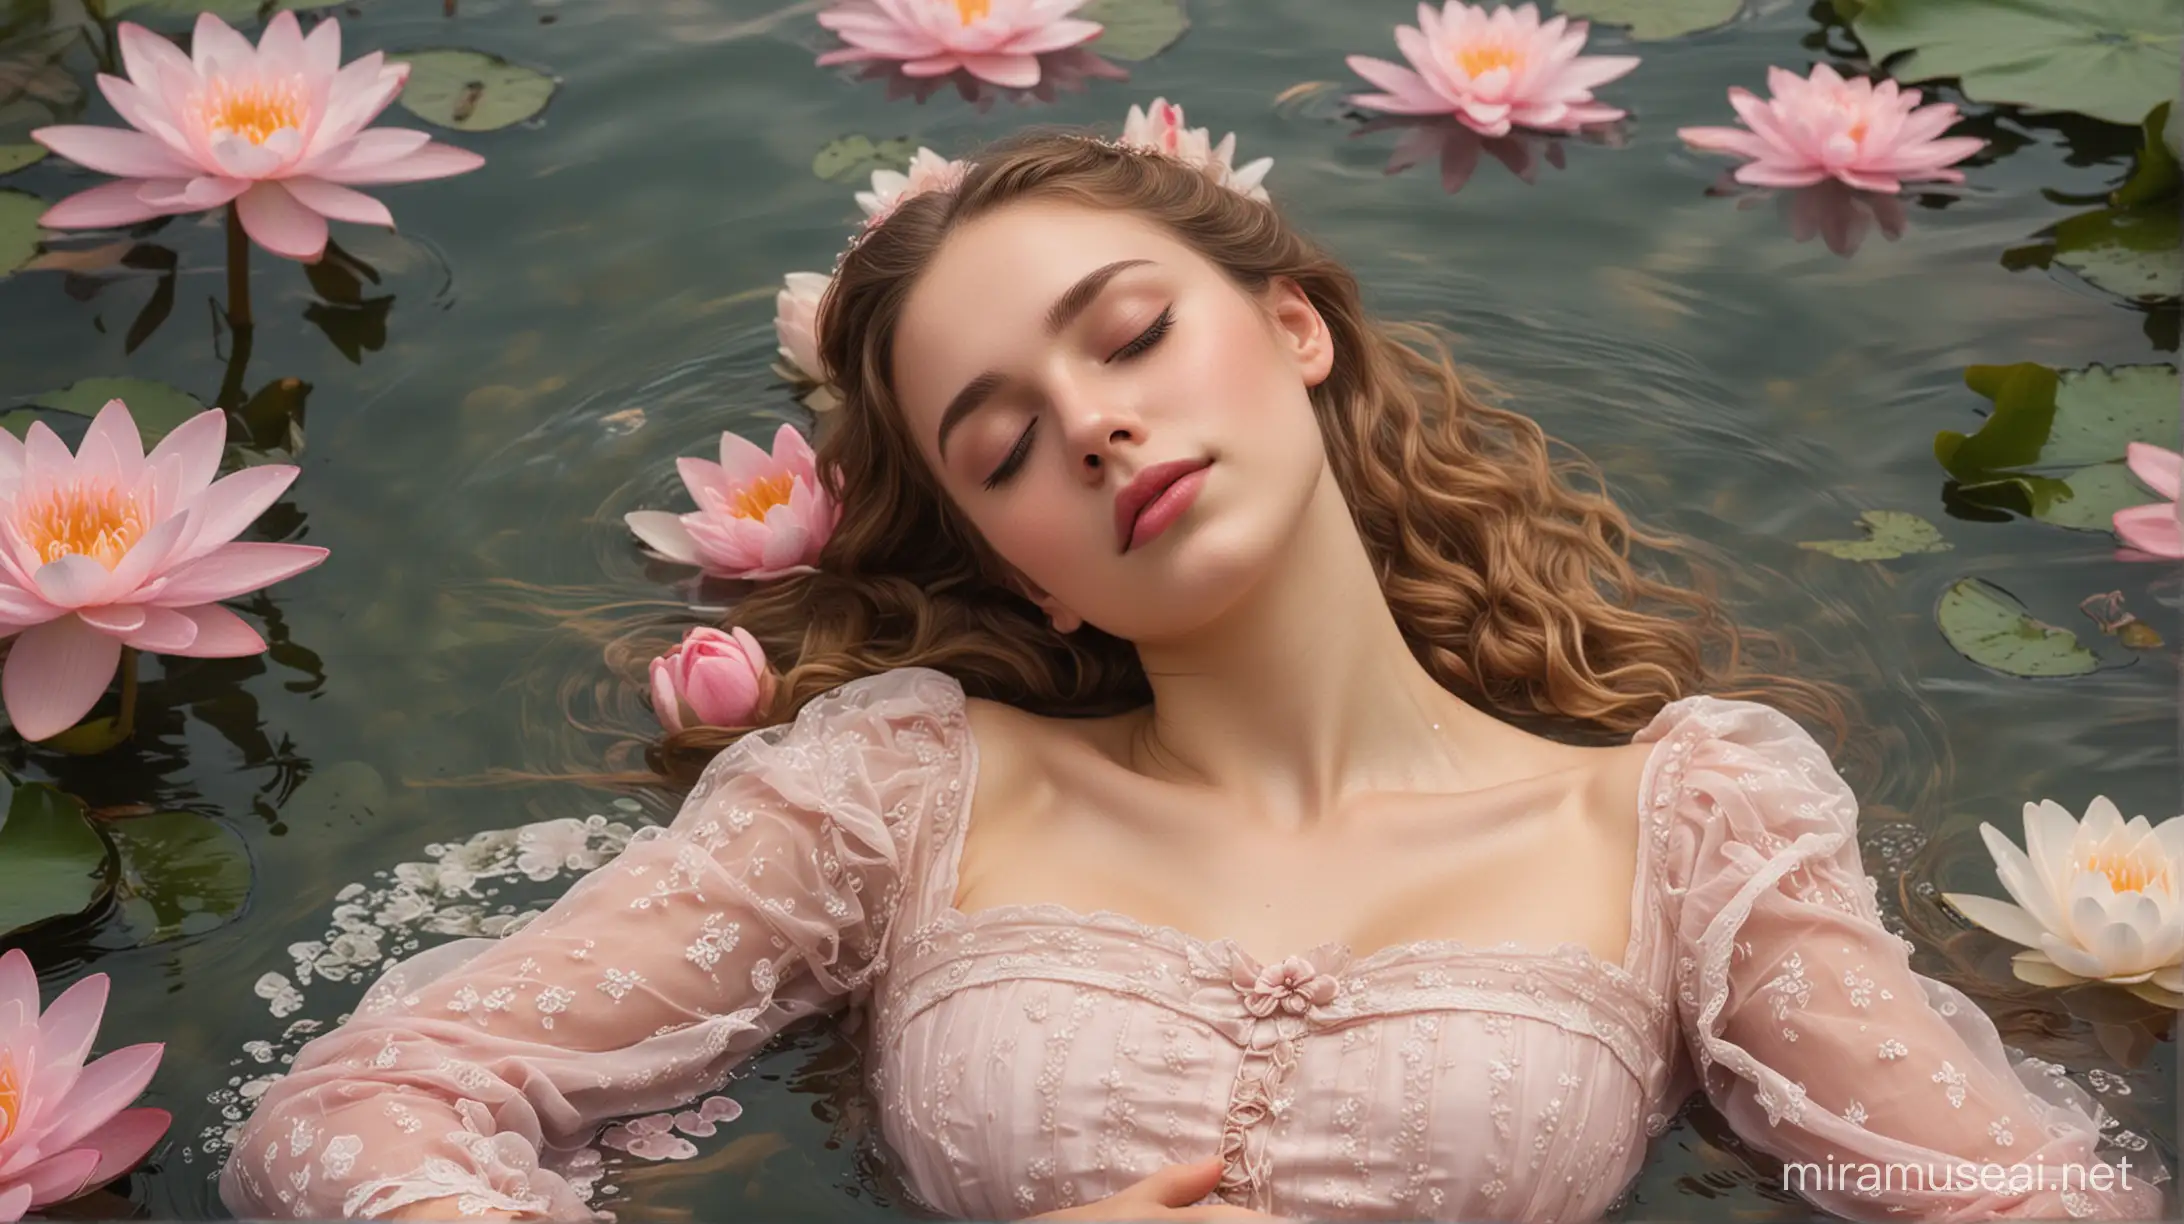 19th-century art style, face focus, beautiful young woman partially submerged in water, surrounded by gorgeously delicate pink water lilies, eyes closed, she is around 20 years old, long wavy golden-brown hair, cherry-pink lips, light pink cheeks, she is wearing a lacy pink Victorian-style dress